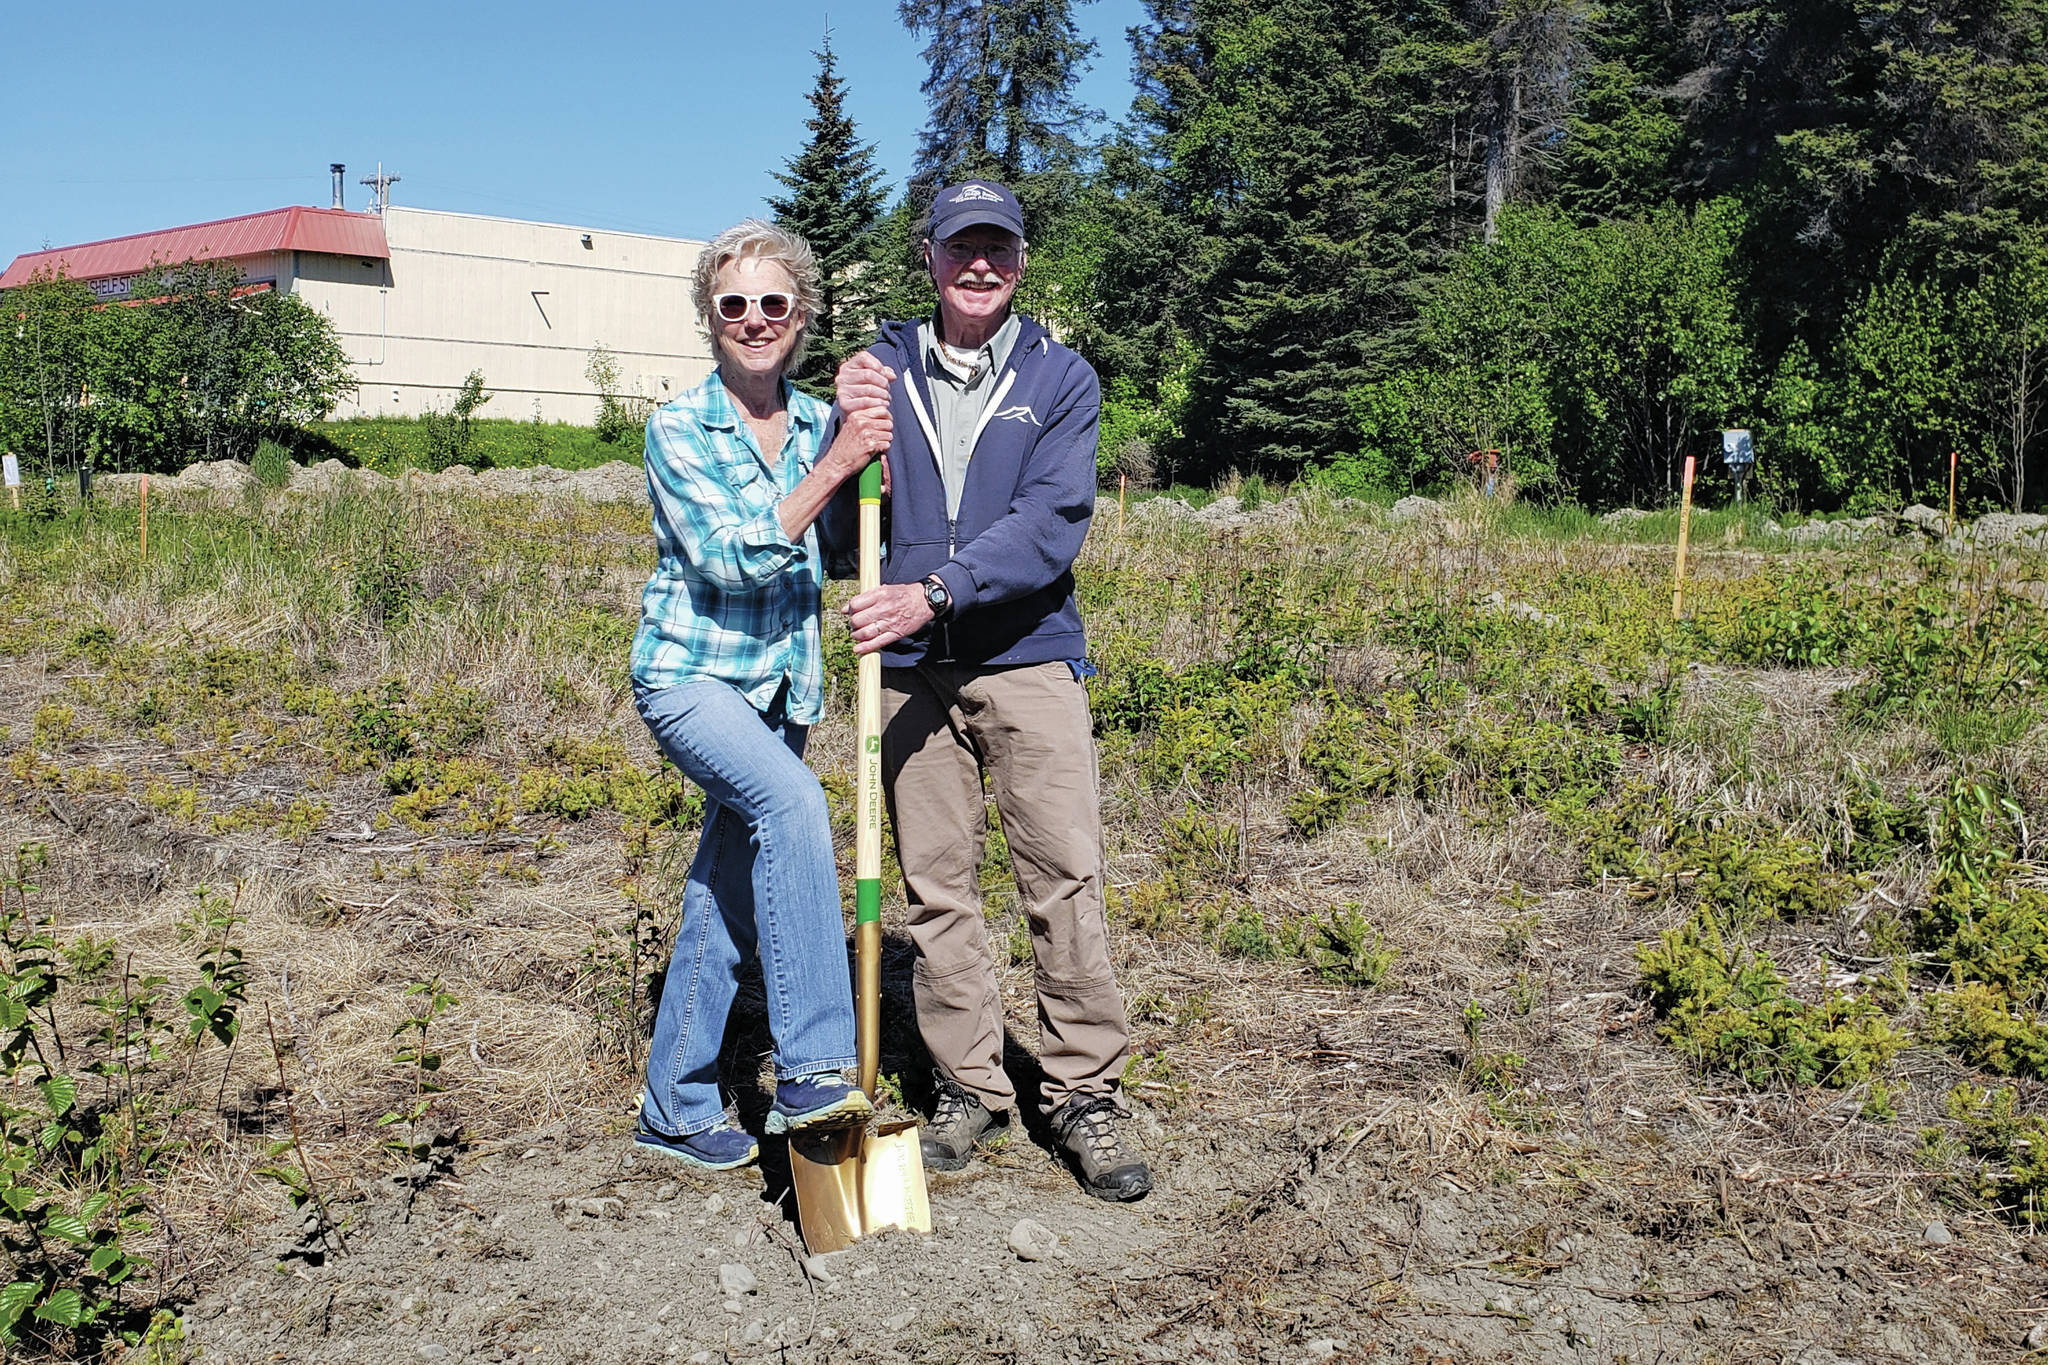 Sherry Stead, left, and Don Stead, right, pose on Sunday, June 6, 2021, at the groundbreaking of the new building for Grace Ridge Brewery at 870 Smoky Bay Way. Jay-Brant Contractors has started construction of the brewery, tasting room and beer garden to be completed by next fall. (Photo courtesy of Grace Ridge Brewery)